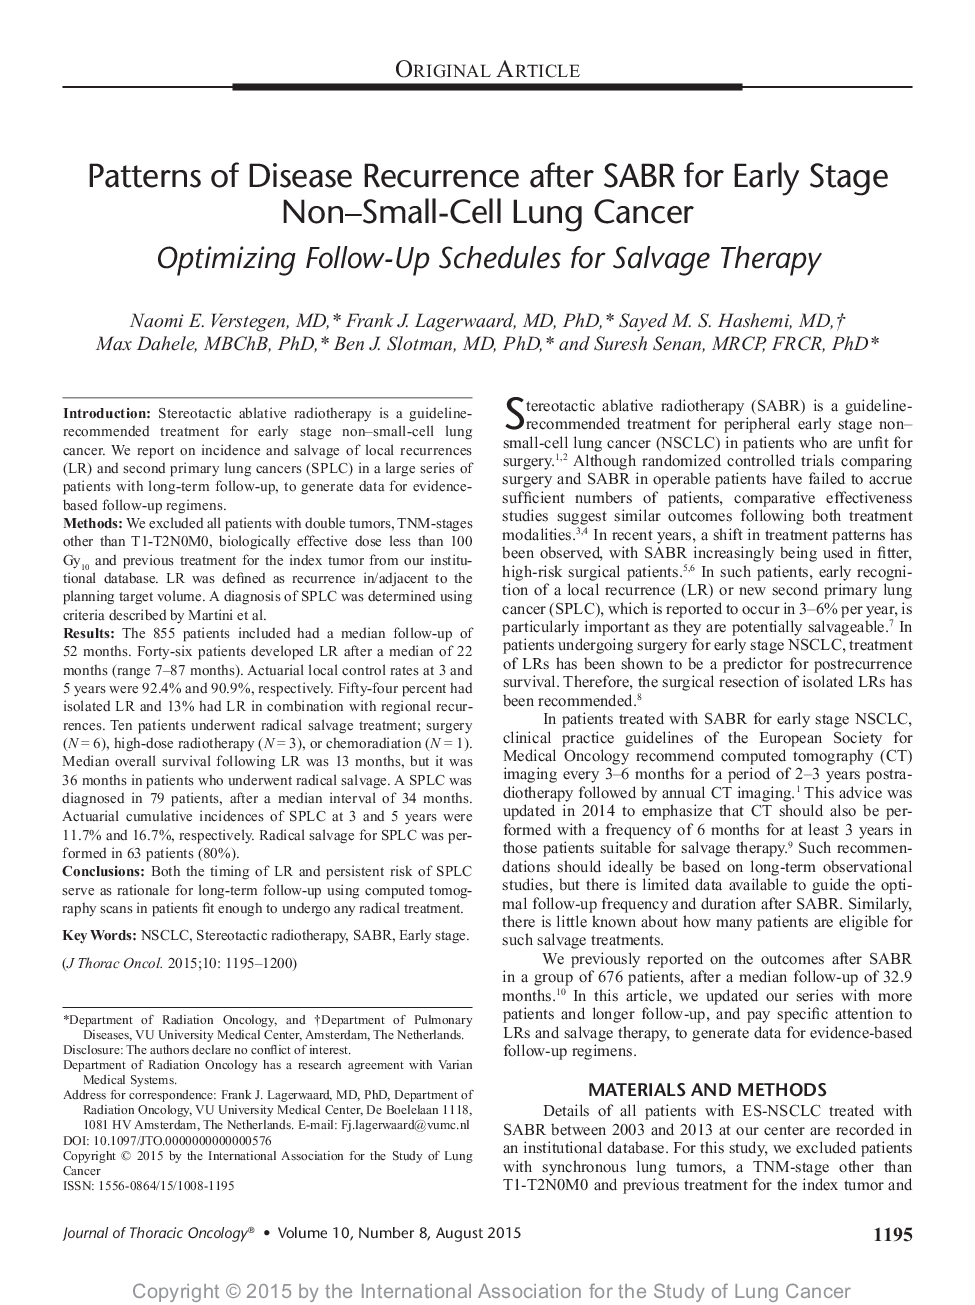 Patterns of Disease Recurrence after SABR for Early Stage Non-Small-Cell Lung Cancer: Optimizing Follow-Up Schedules for Salvage Therapy